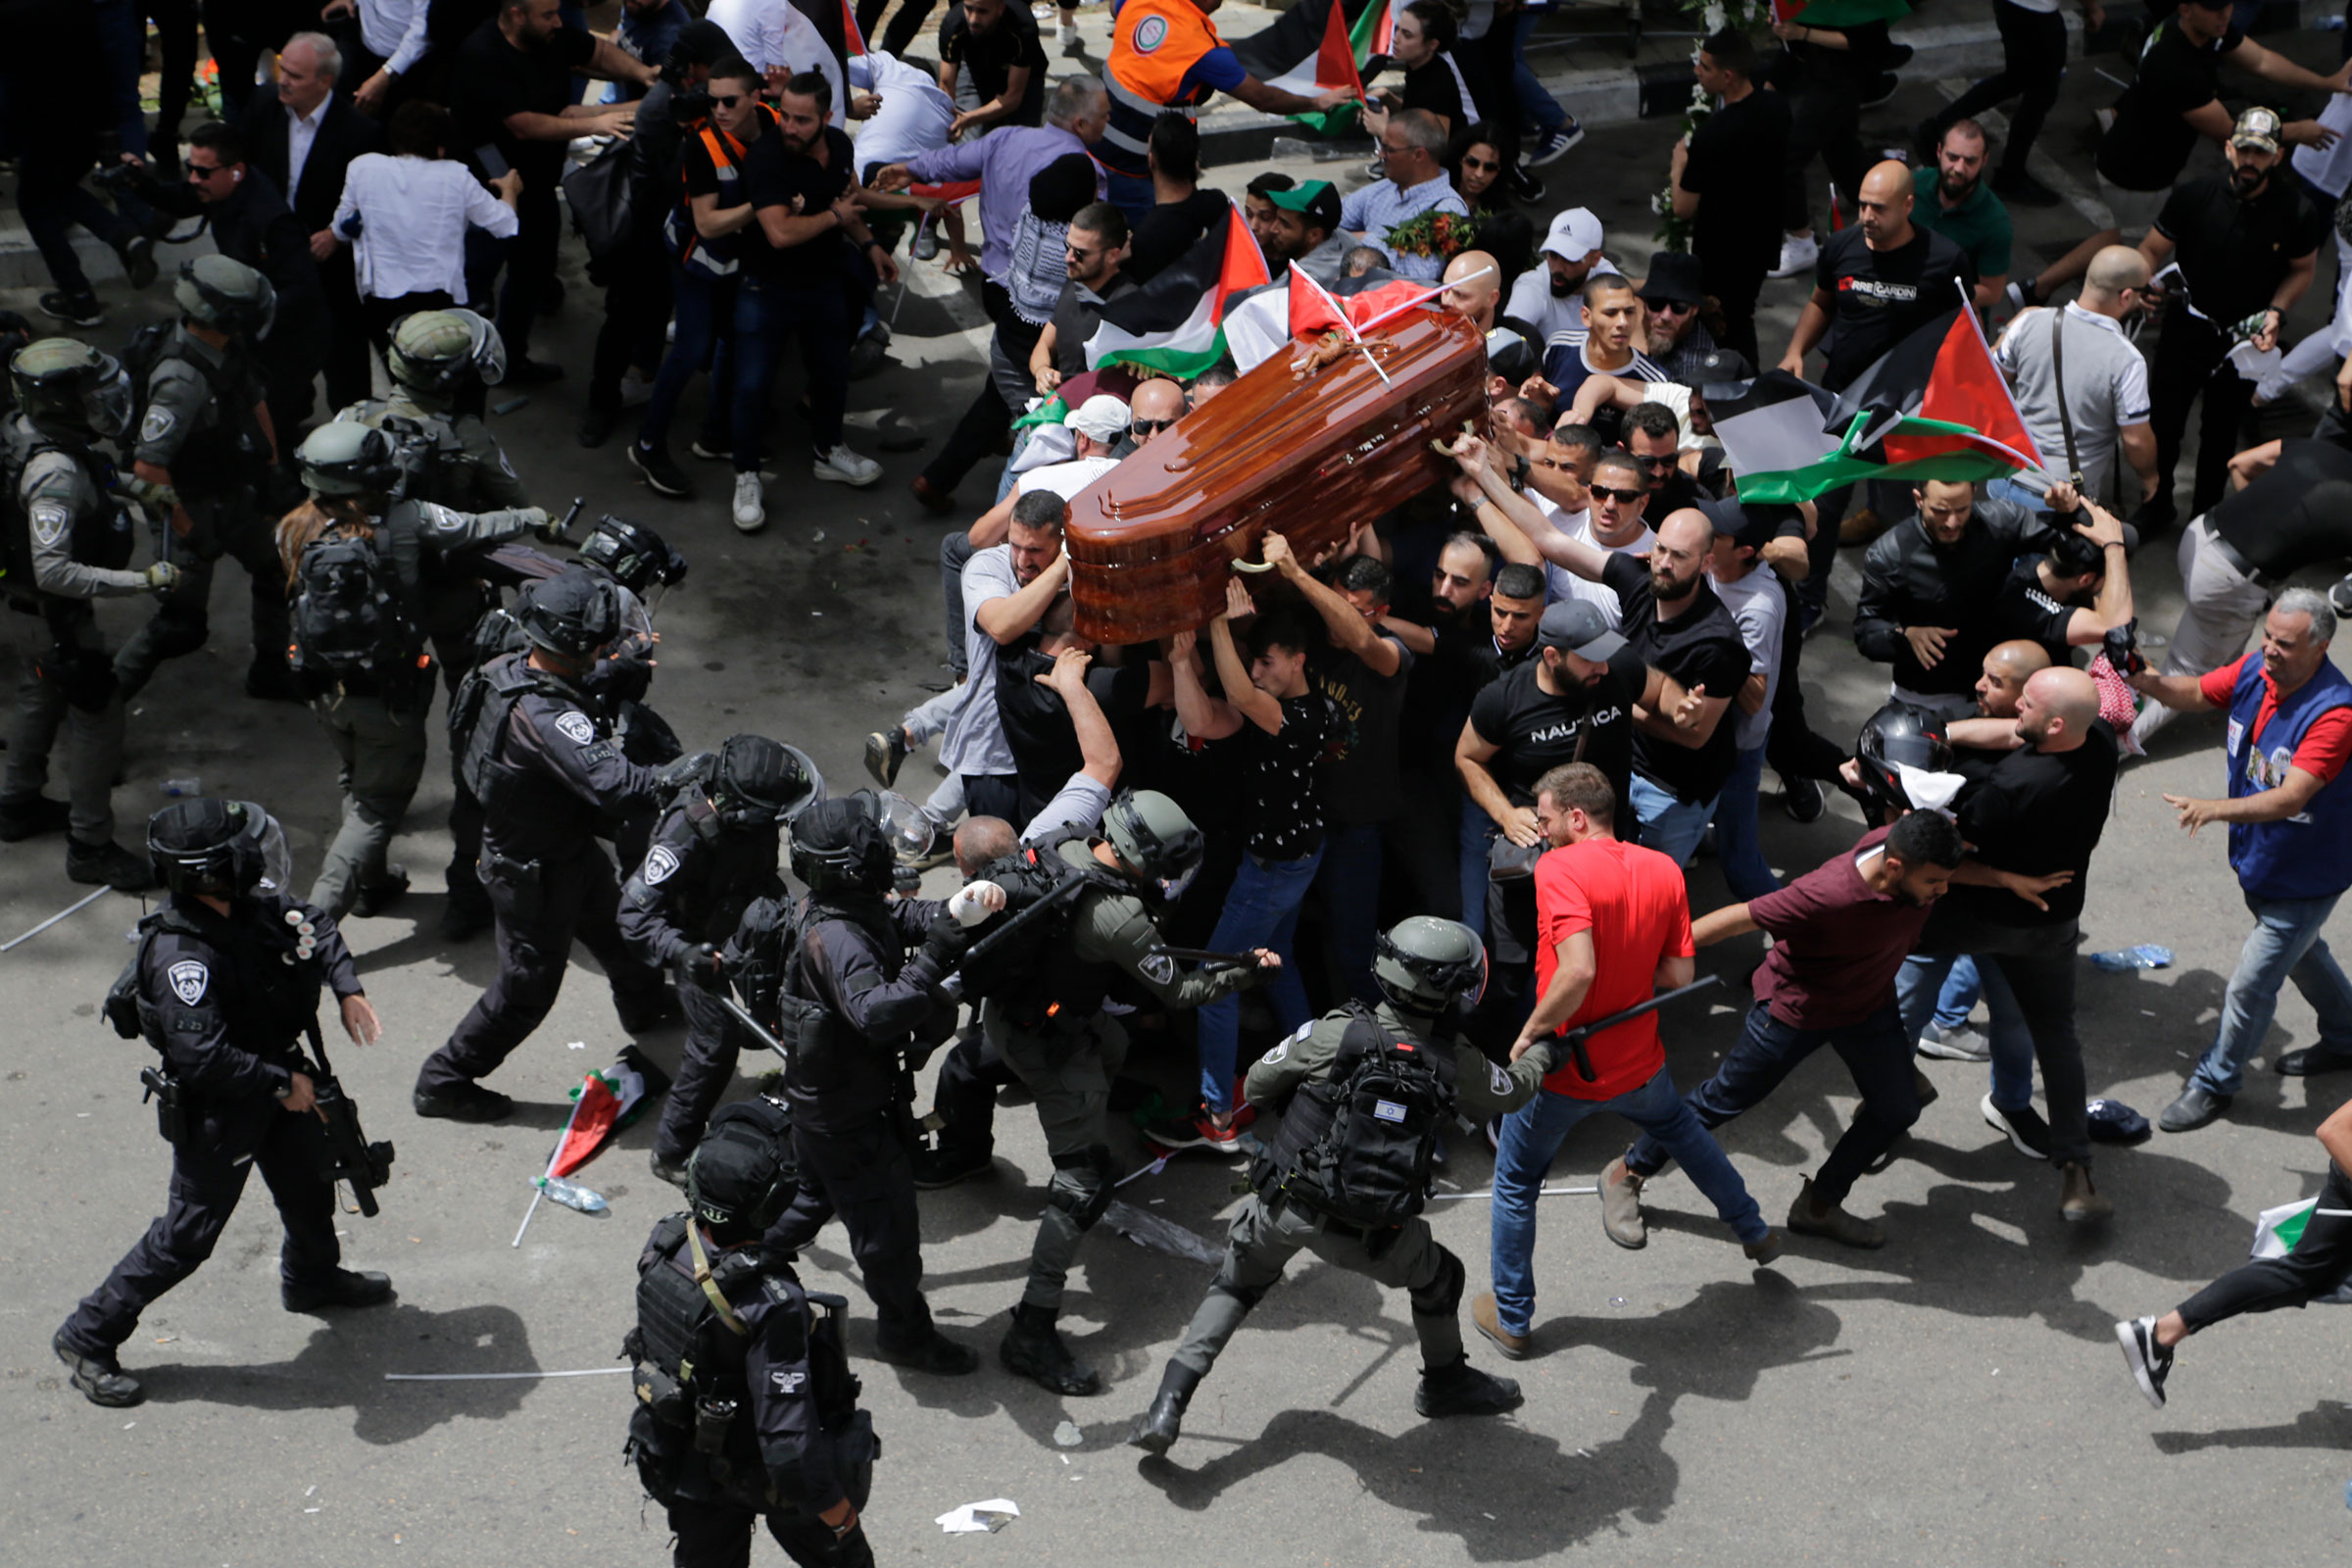 Israeli police confront mourners as they carry the casket of slain Al Jazeera veteran journalist Shireen Abu Akleh during her funeral in east Jerusalem, on May 13. Abu Akleh, a Palestinian-American reporter who covered the Mideast conflict for more than 25 years, was shot dead during an Israeli military raid in the West Bank town of Jenin.